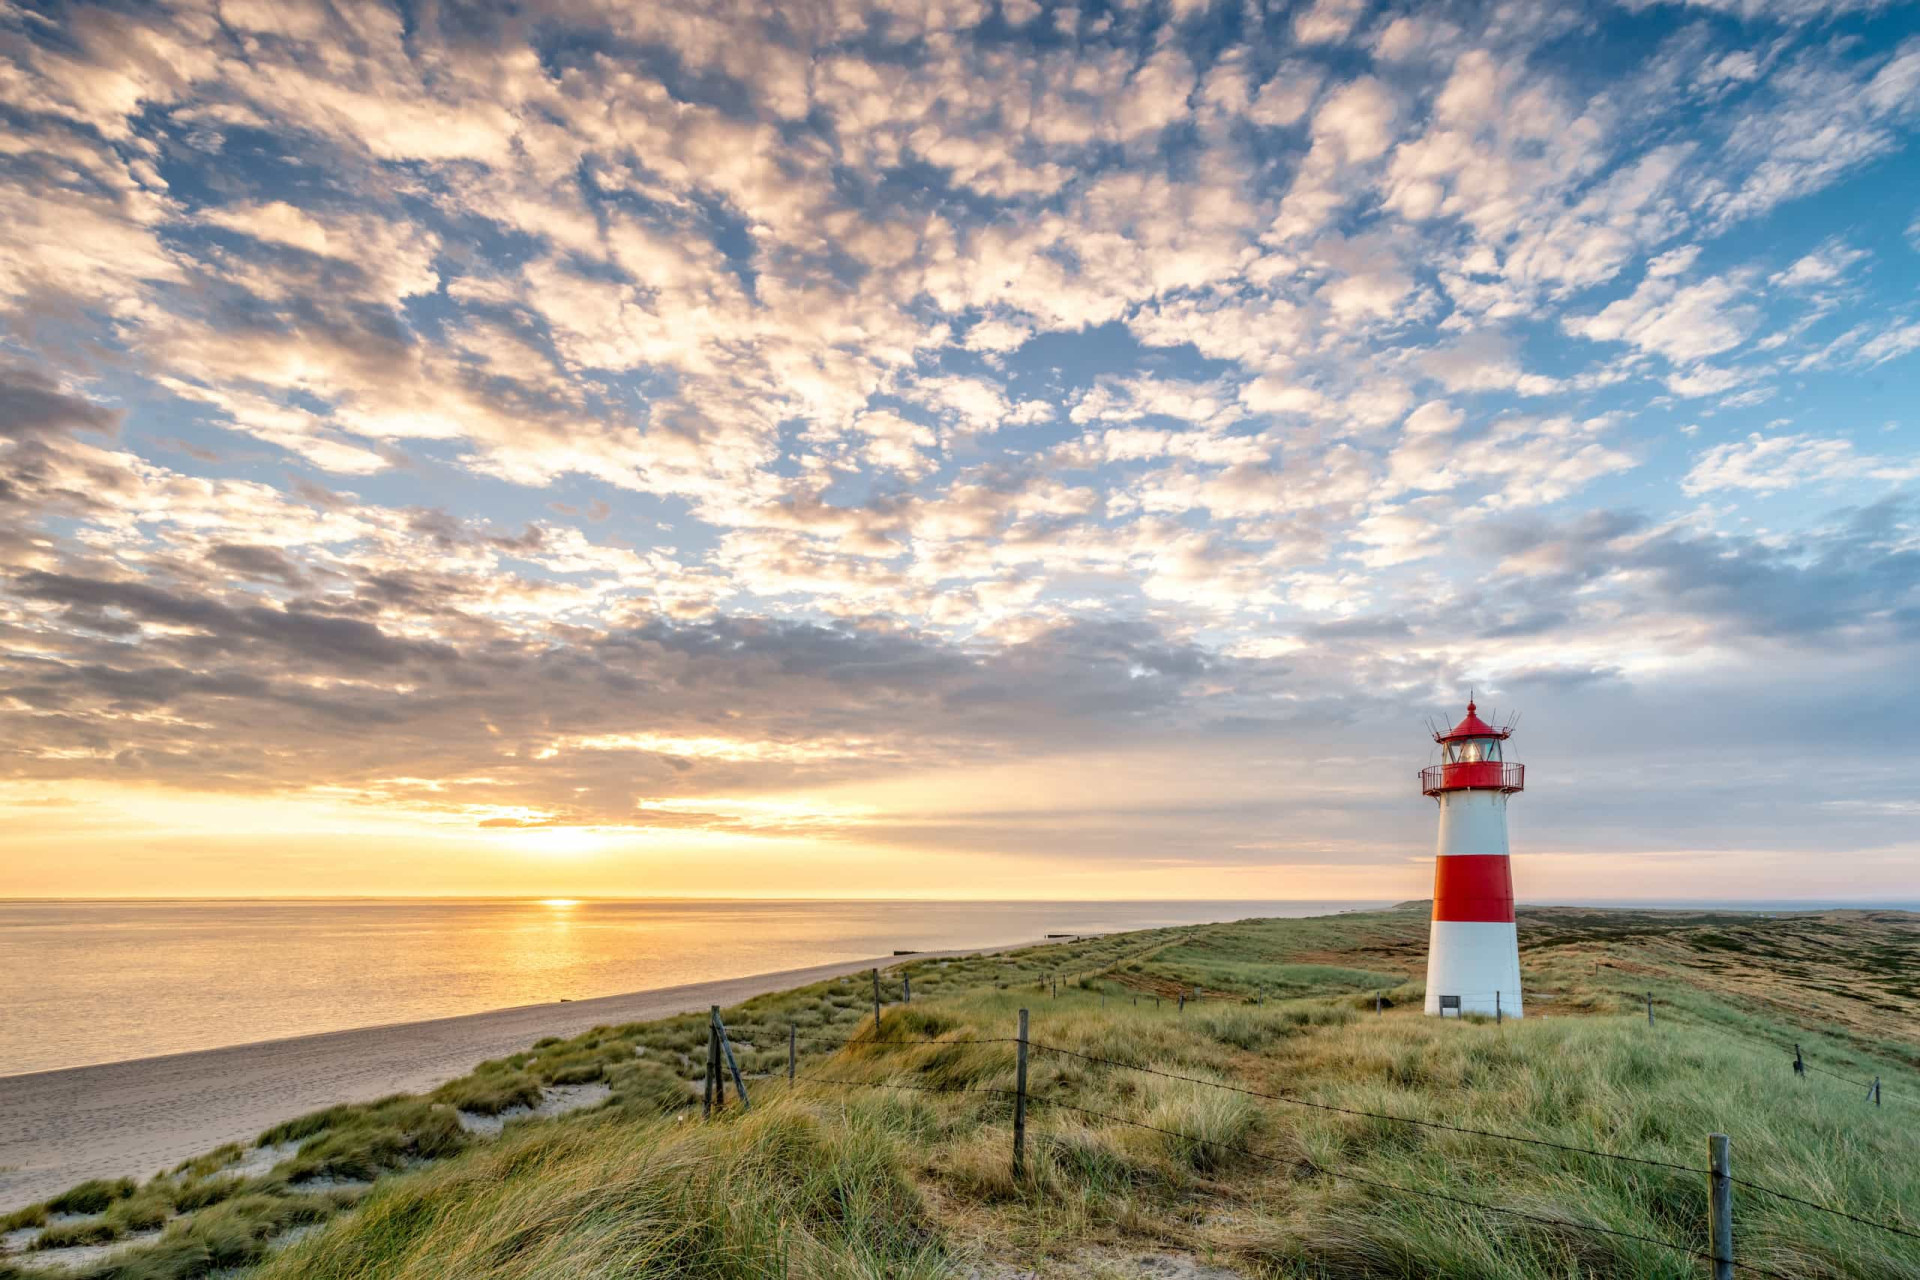 <p>The Frisian island of Sylt, a narrow island anchored in the North Sea off the coast of Schleswig-Holstein, has long enjoyed a reputation as an exclusive resort destination. Leisure amenities include saunas, surf schools, and the beaches themselves, hemmed in by rolling dunes textured with heathland.</p><p>You may also like:<a href="https://www.starsinsider.com/n/404127?utm_source=msn.com&utm_medium=display&utm_campaign=referral_description&utm_content=481885v1en-us"> Predictions from 1900 that did (and didn't) come true </a></p>